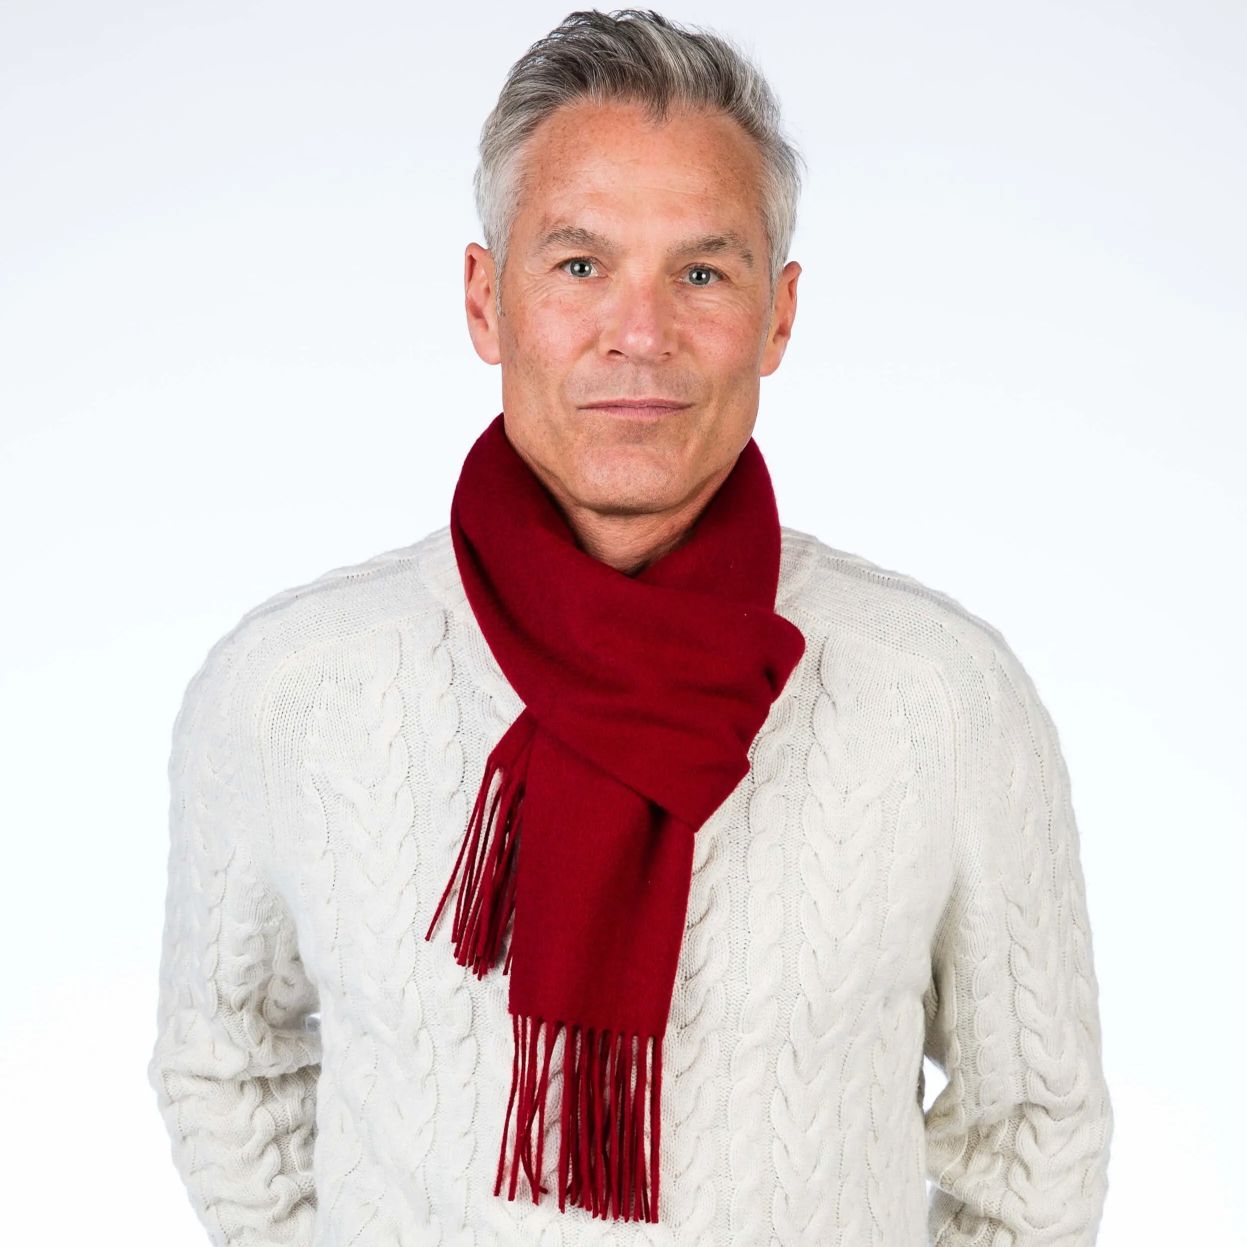 100% Cashmere Woven Scarf (Choice of Colors) by Alashan Cashmere